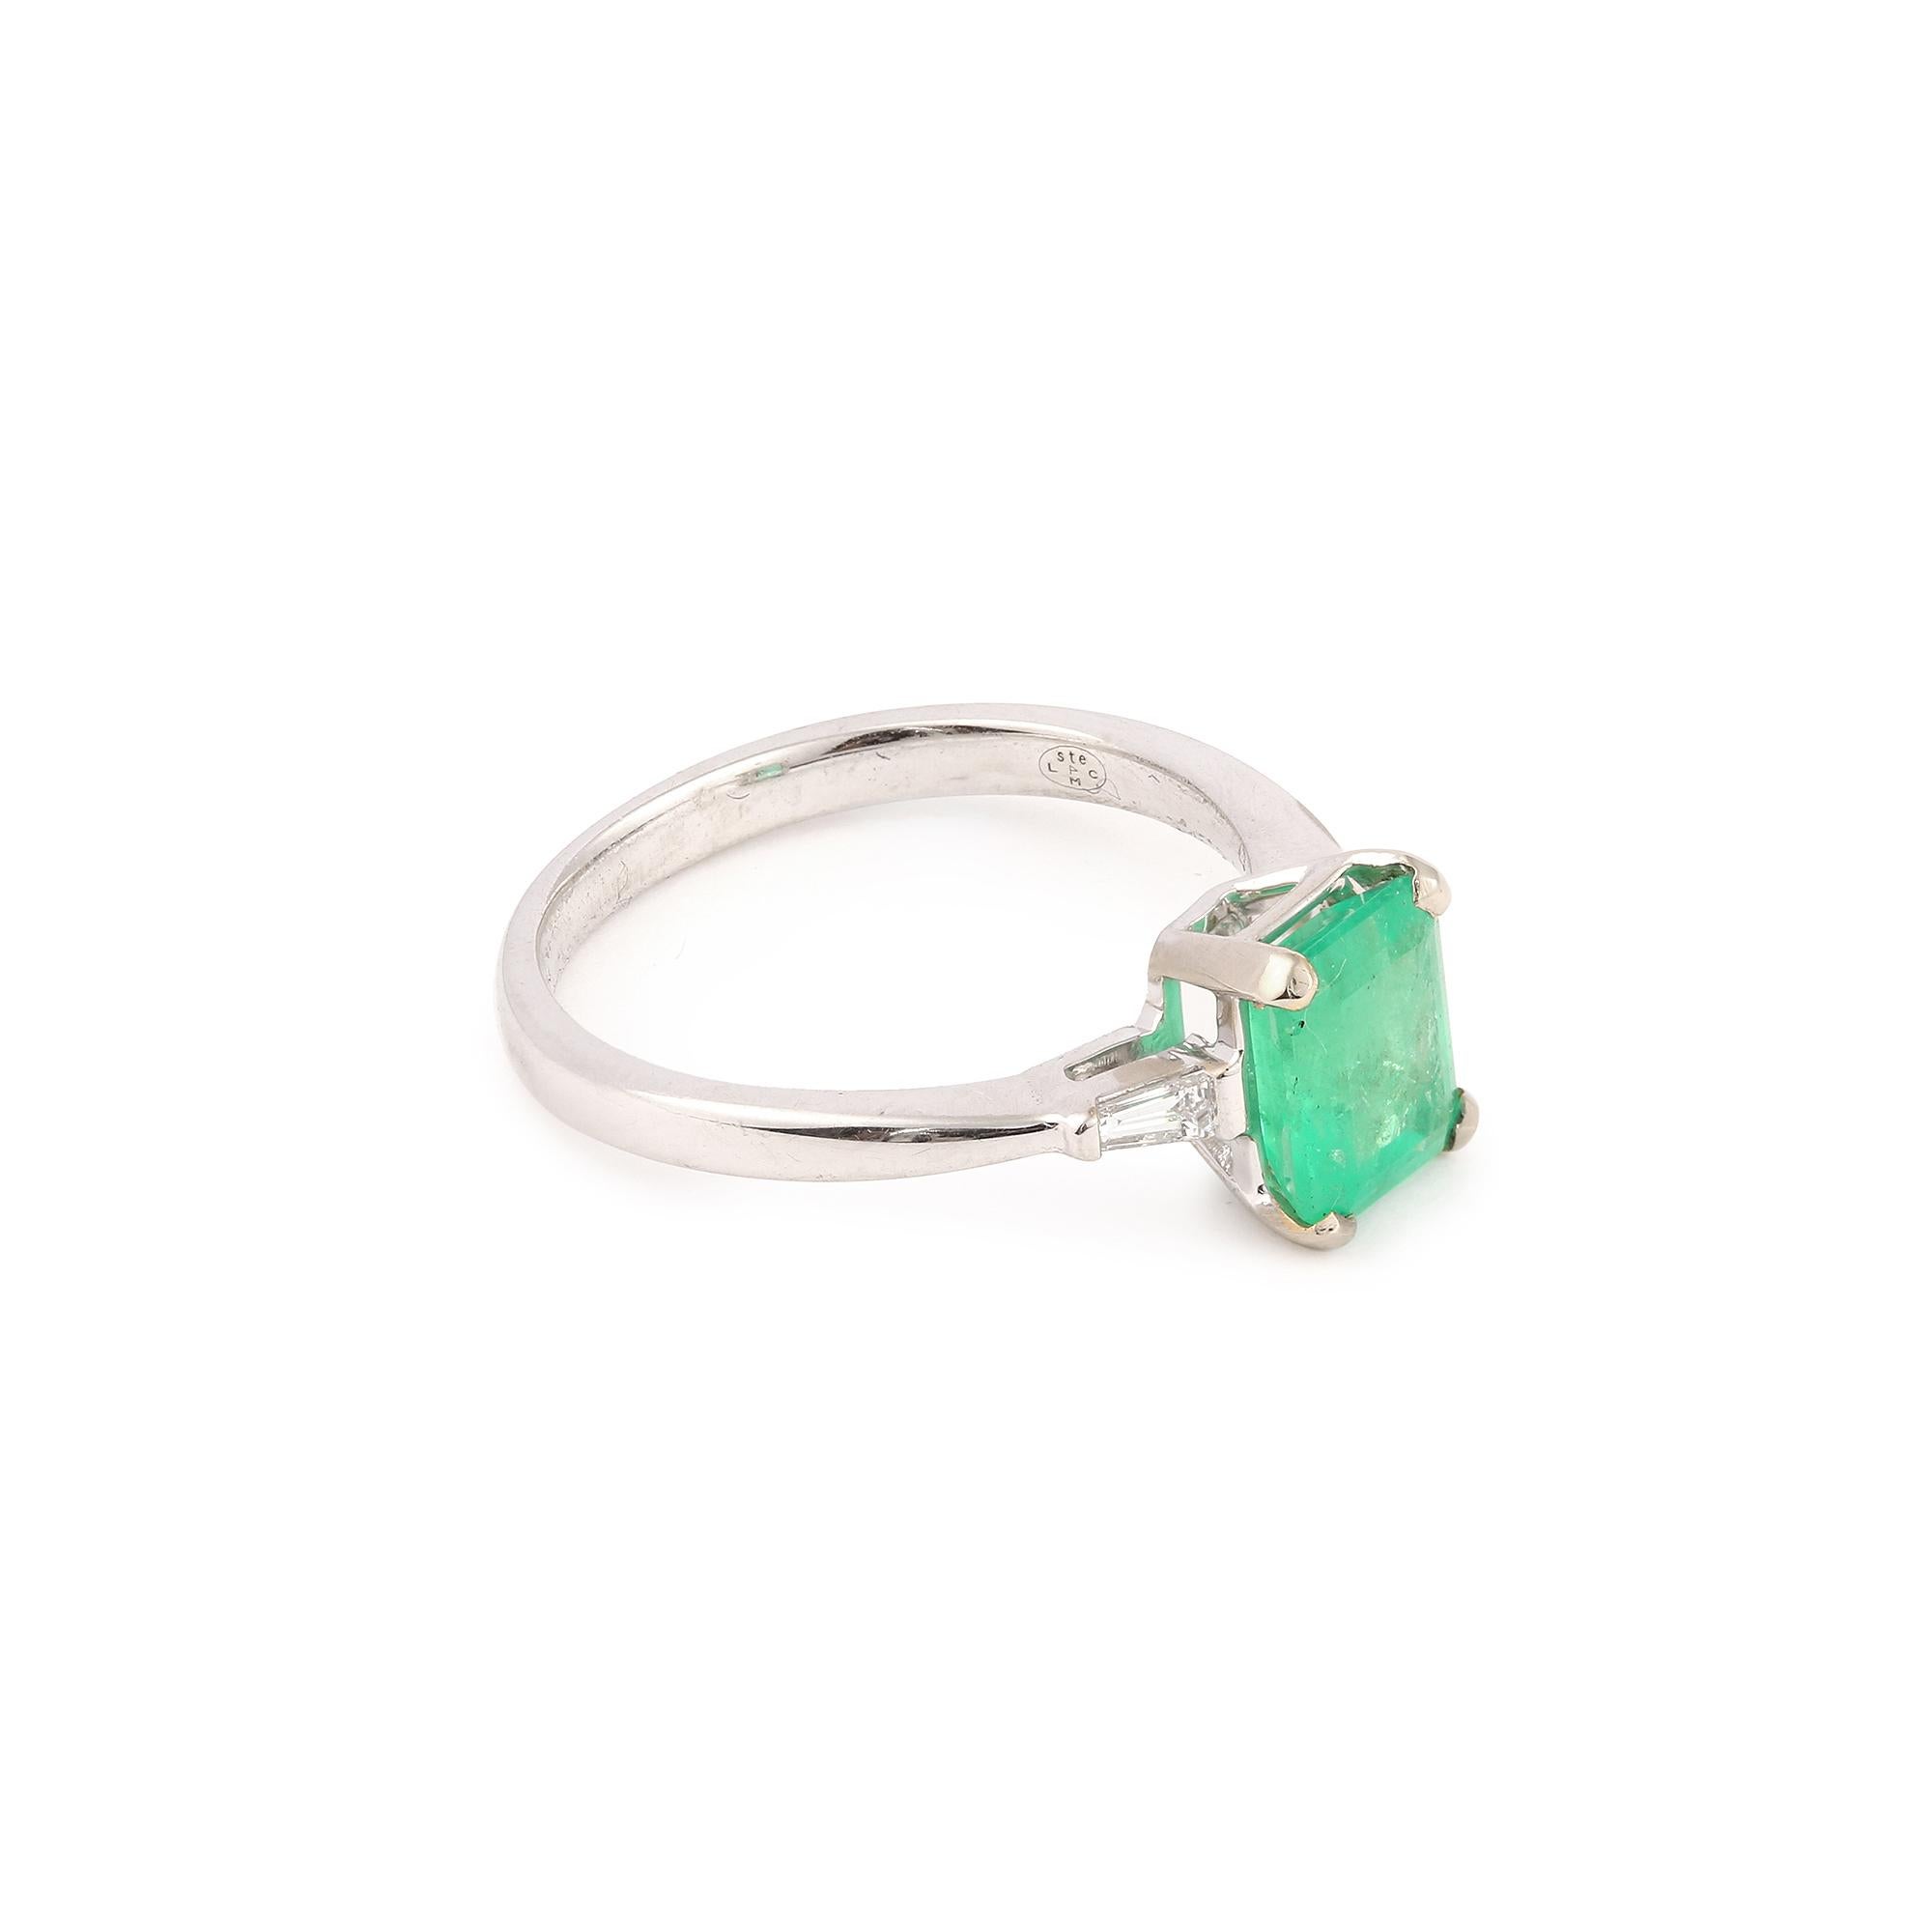 White gold ring set with an emerald-cut Colombian emerald set on both sides with small trapezoid diamonds.

Estimated weight of the emerald : 1.43 carats

Total estimated weight of the diamonds : 0.10 carats

Ring size : 6.12 x 7.51 x 6.08 mm (